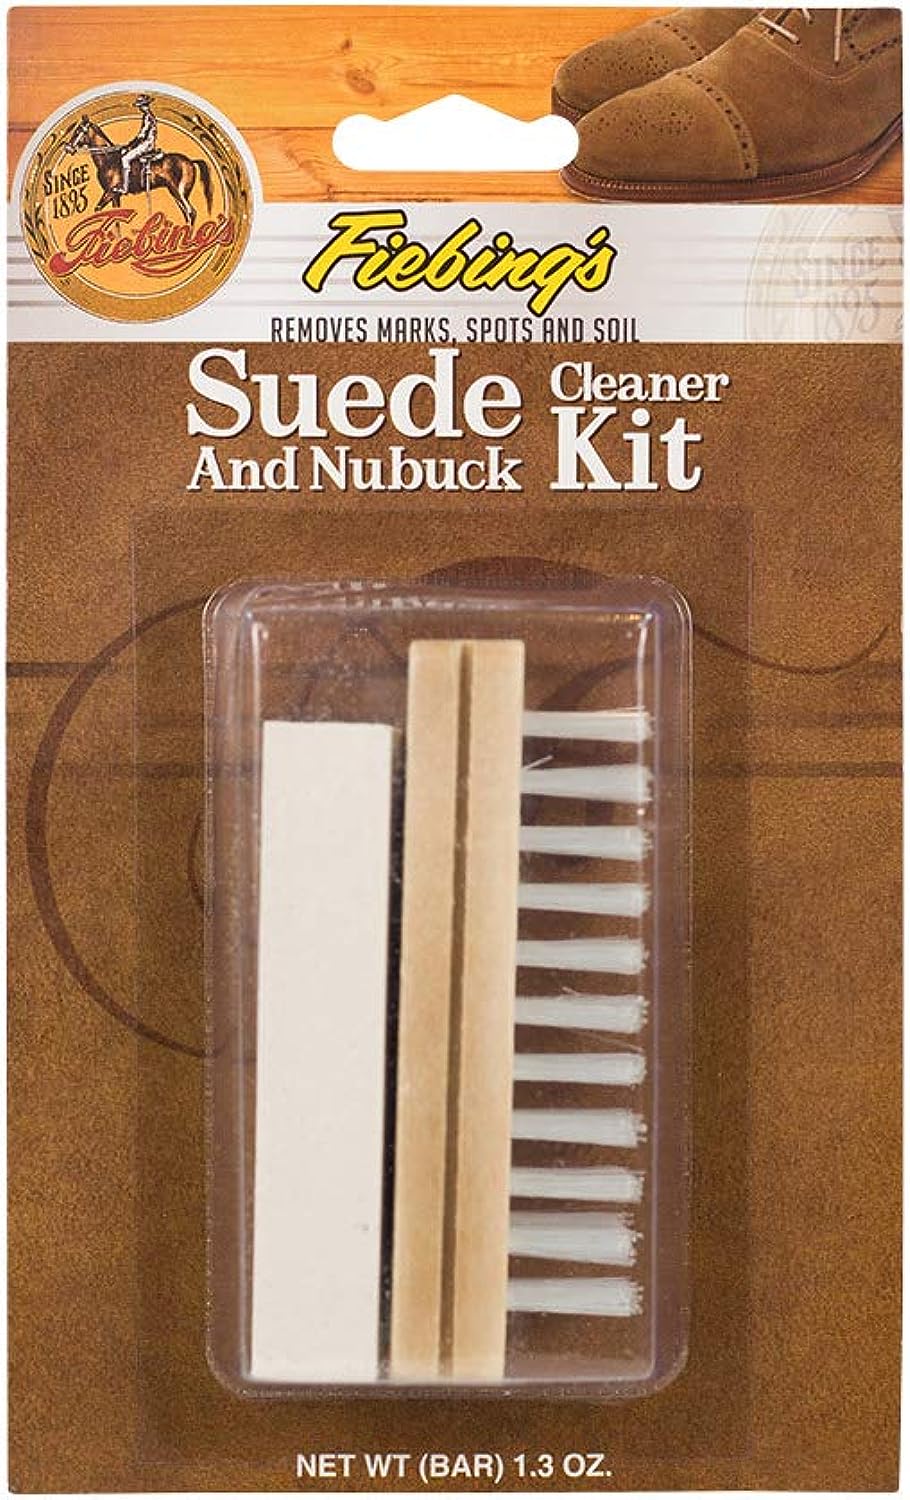 Fiebing's Suede & Nubuck Cleaner Kit - Remove Stains & [...]